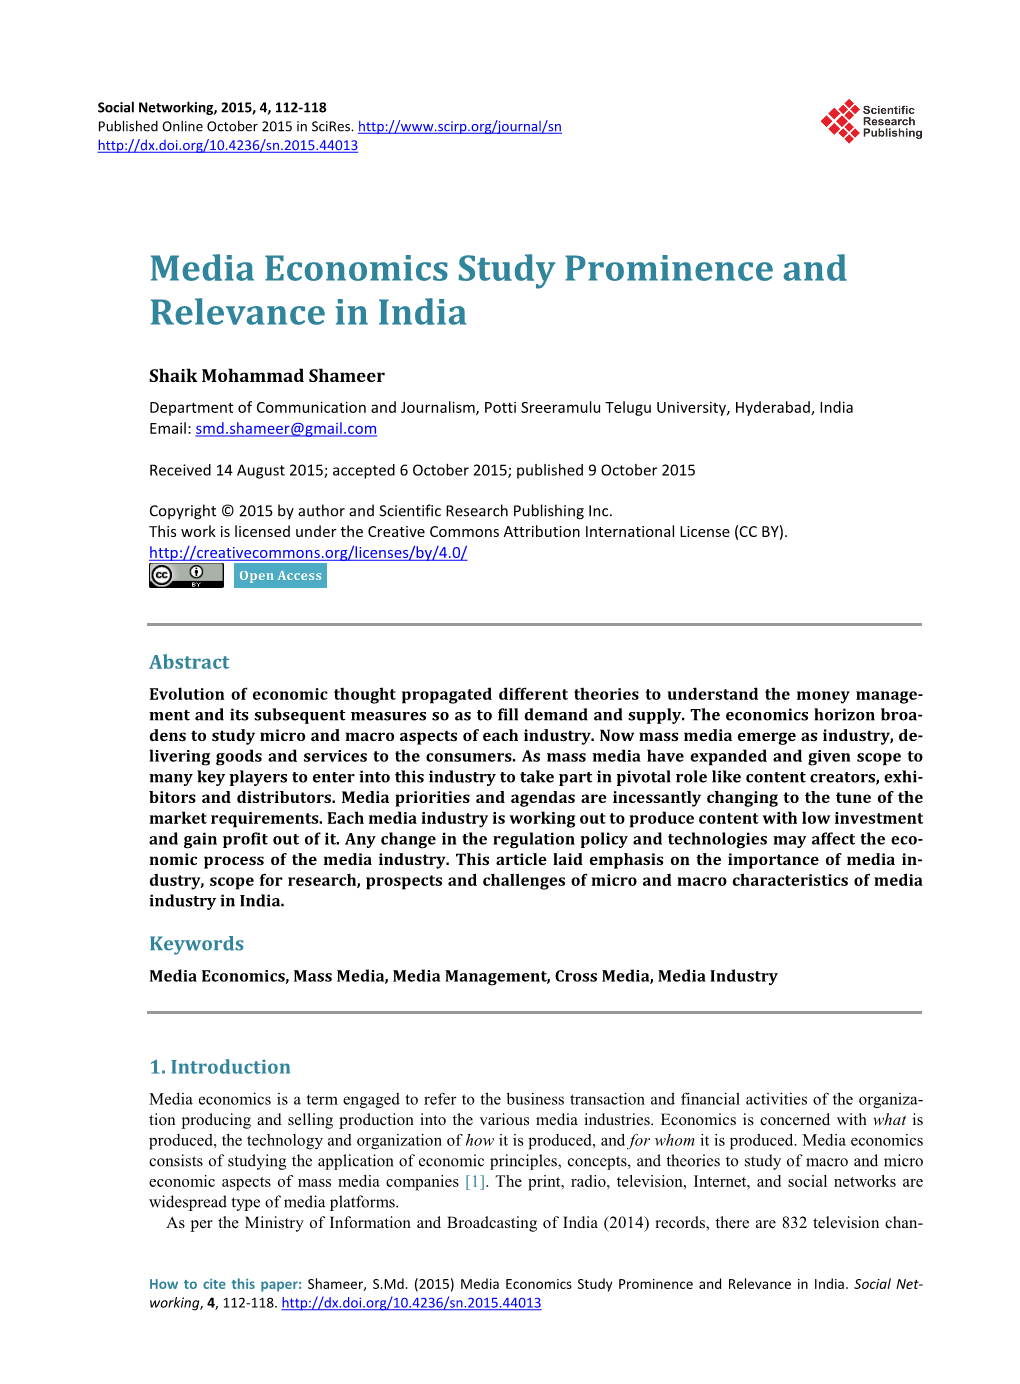 Media Economics Study Prominence and Relevance in India